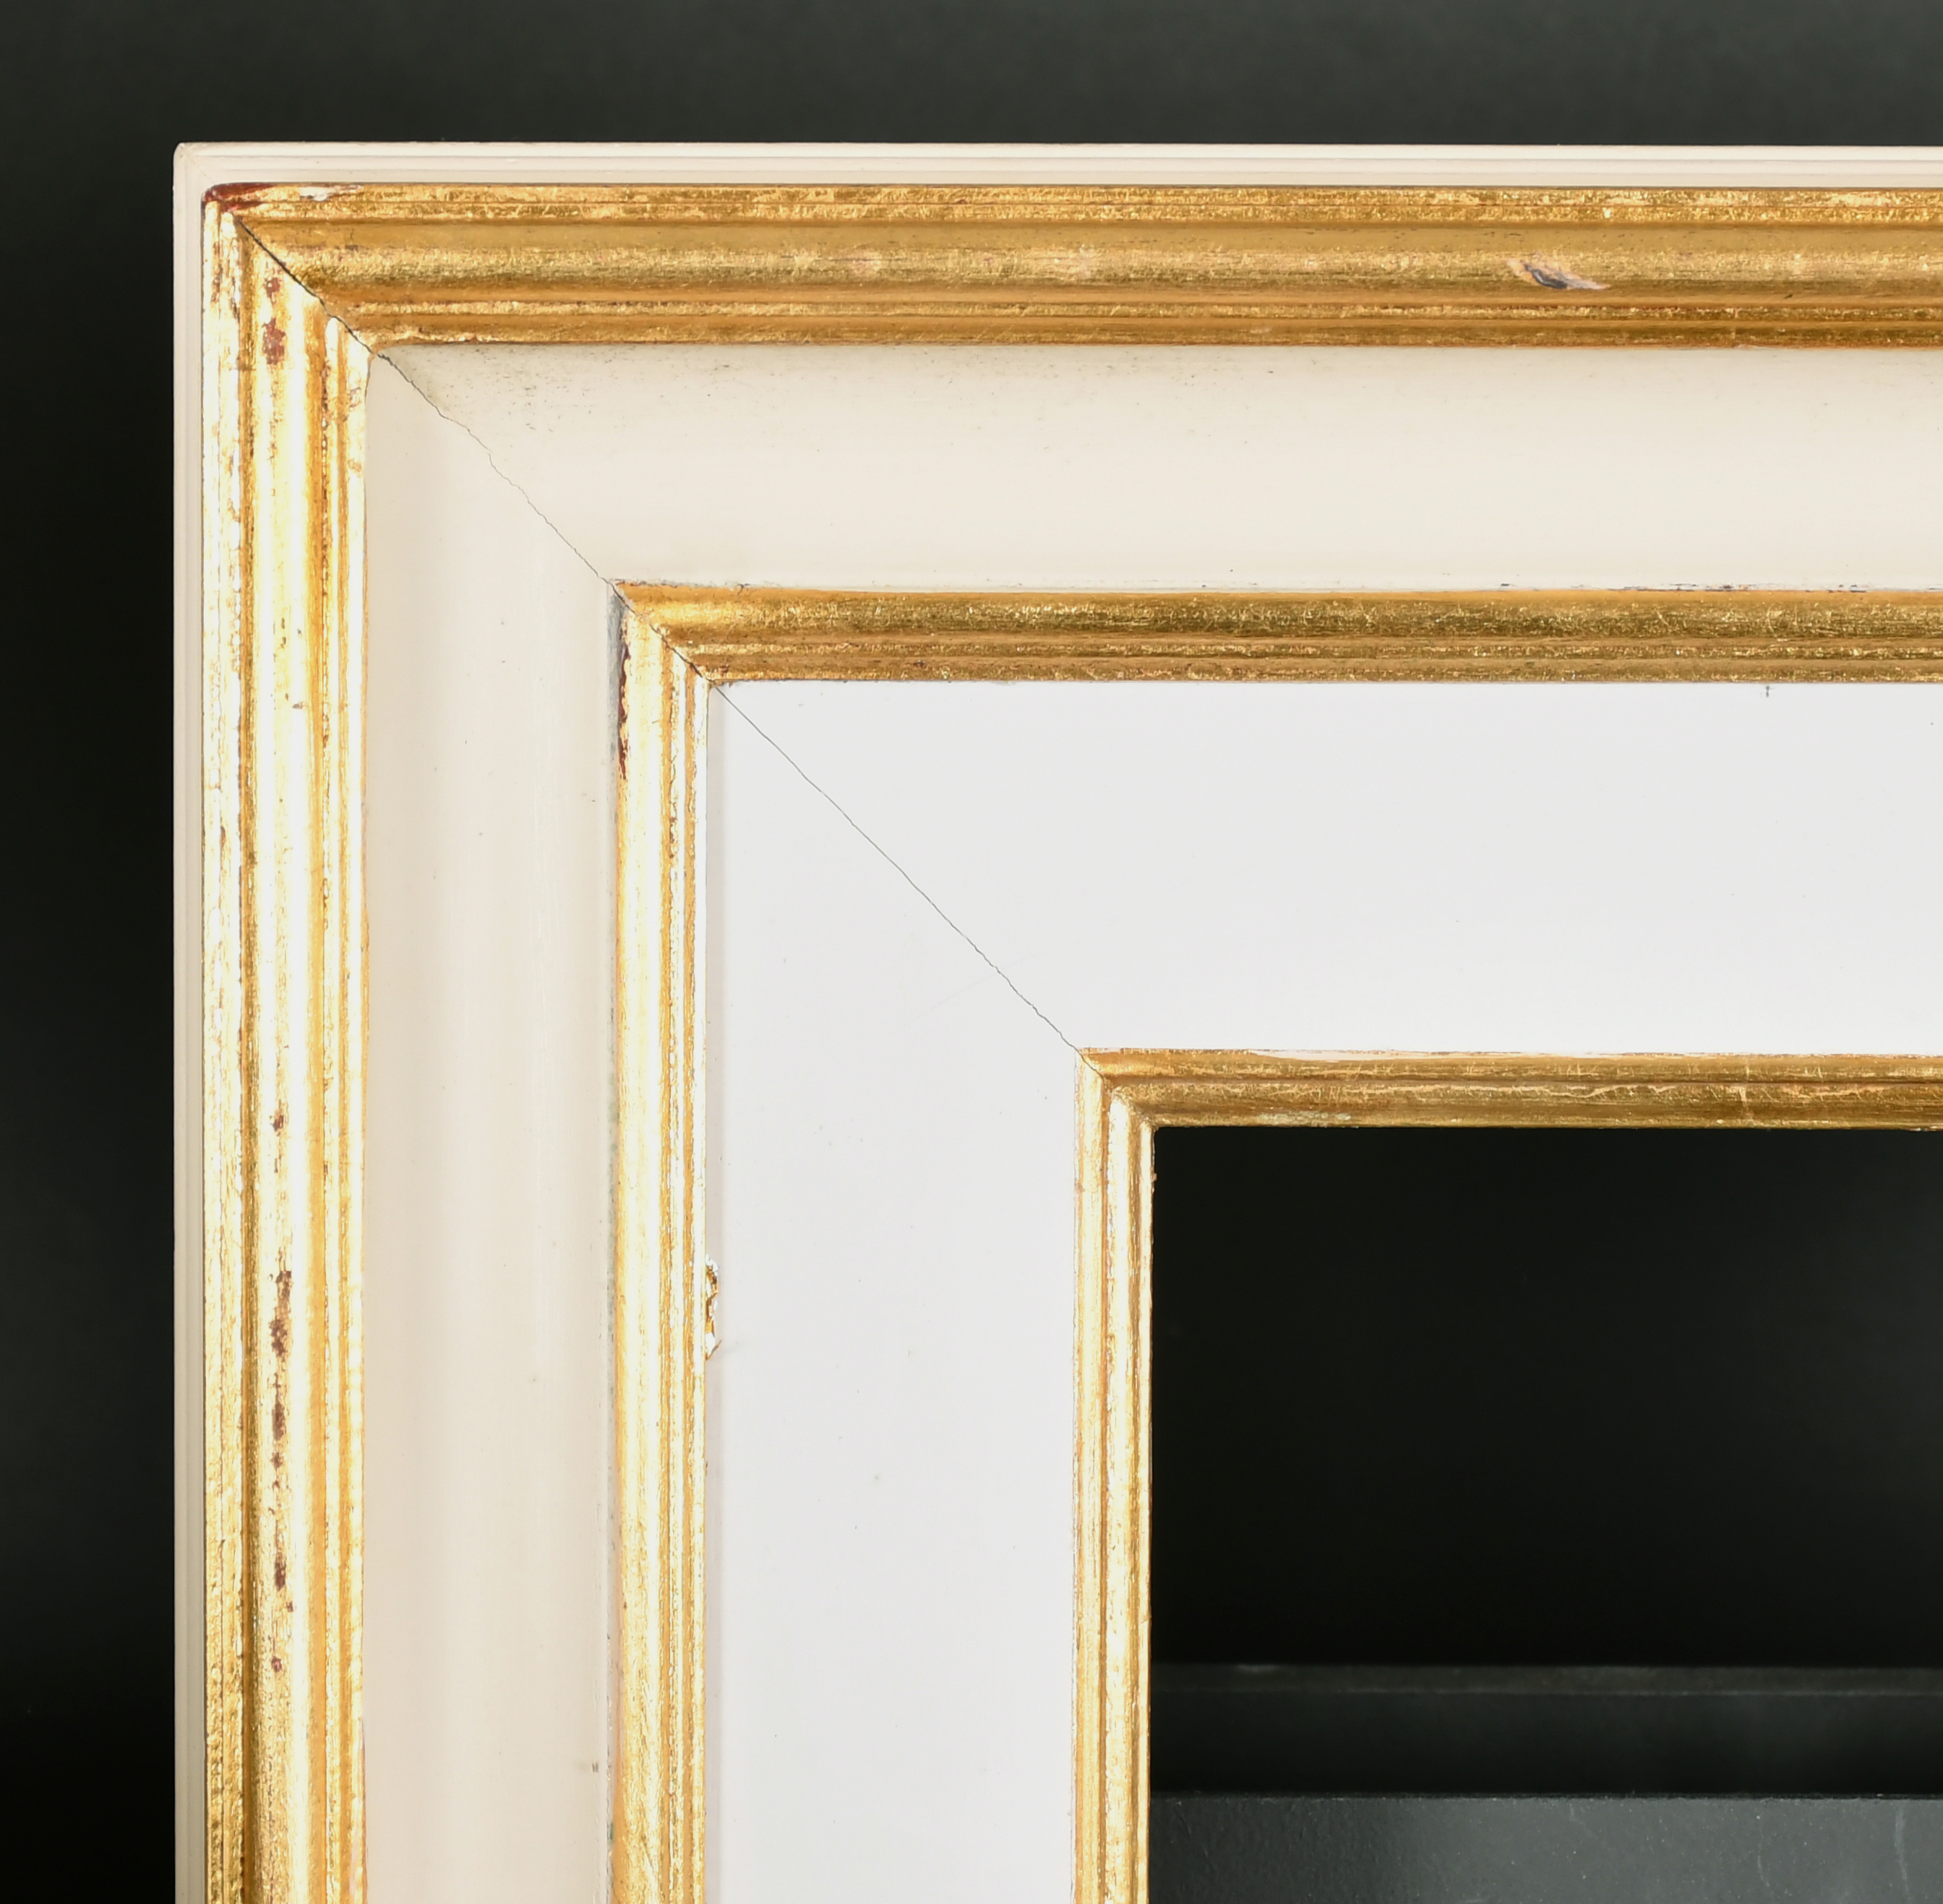 21st Century English School. A Gilt and White Painted Frame, rebate 18" x 10" (45.7 x 25.4cm)